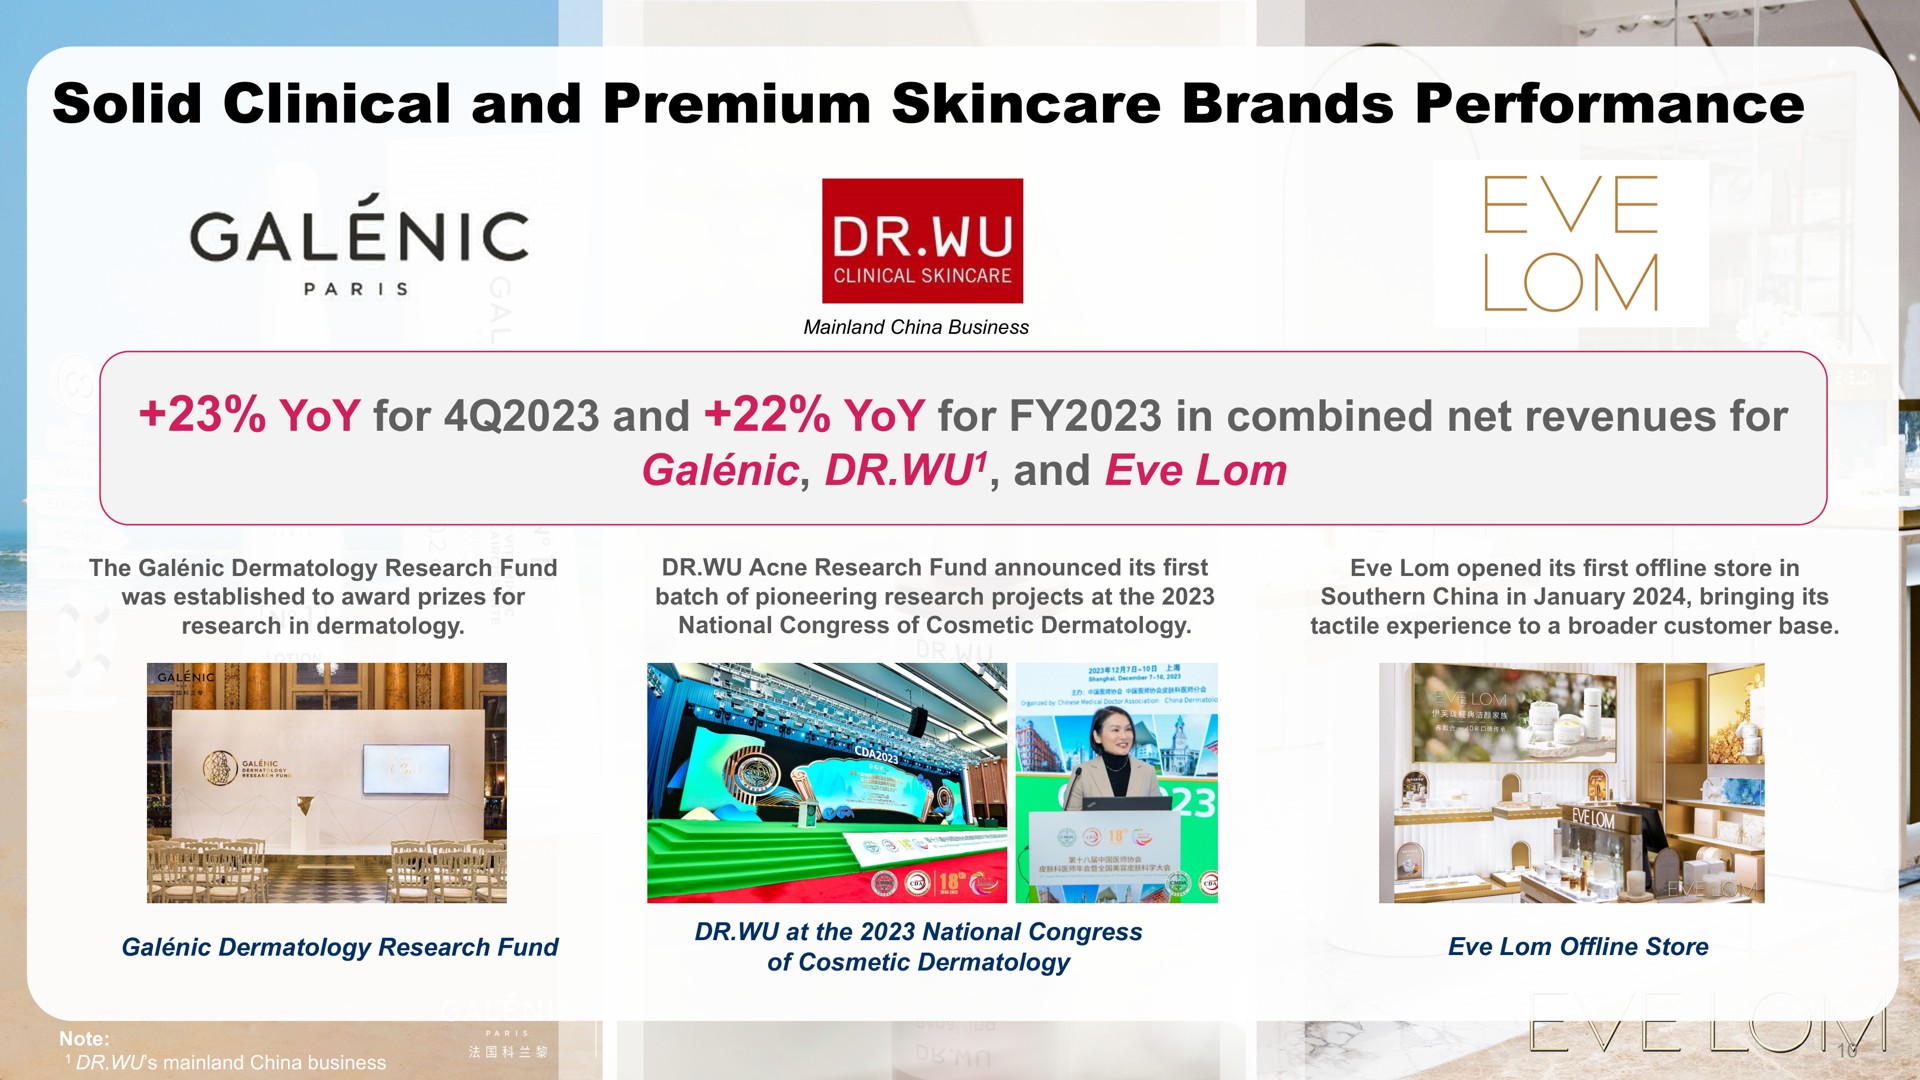 solid clinical and premium brands performance galenic eve as a ewe | Yatsen